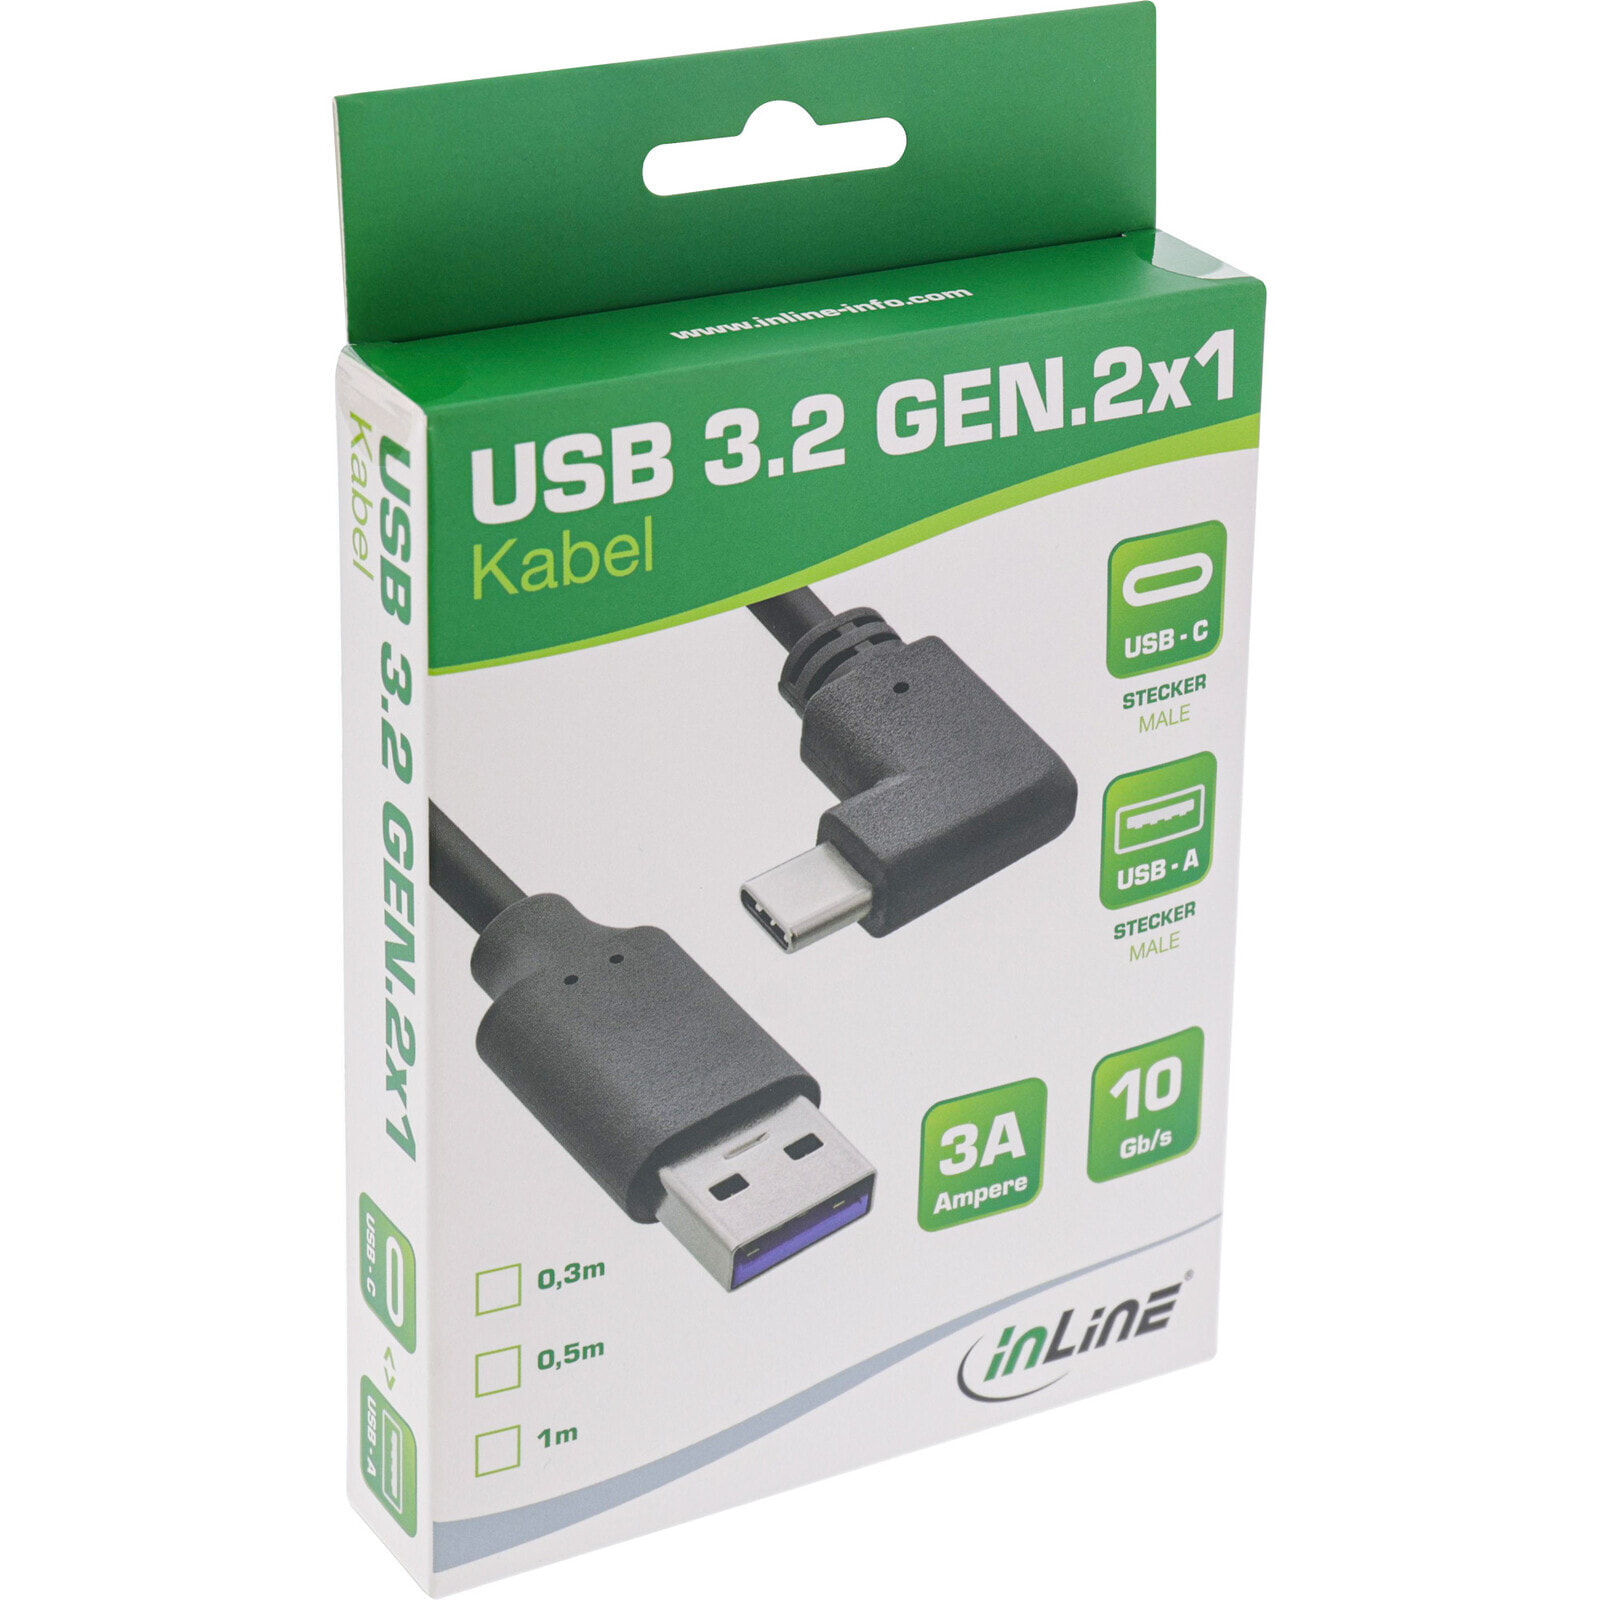 USB 3.2 cable - USB-C male angled to USB-A male - black - 0.5m